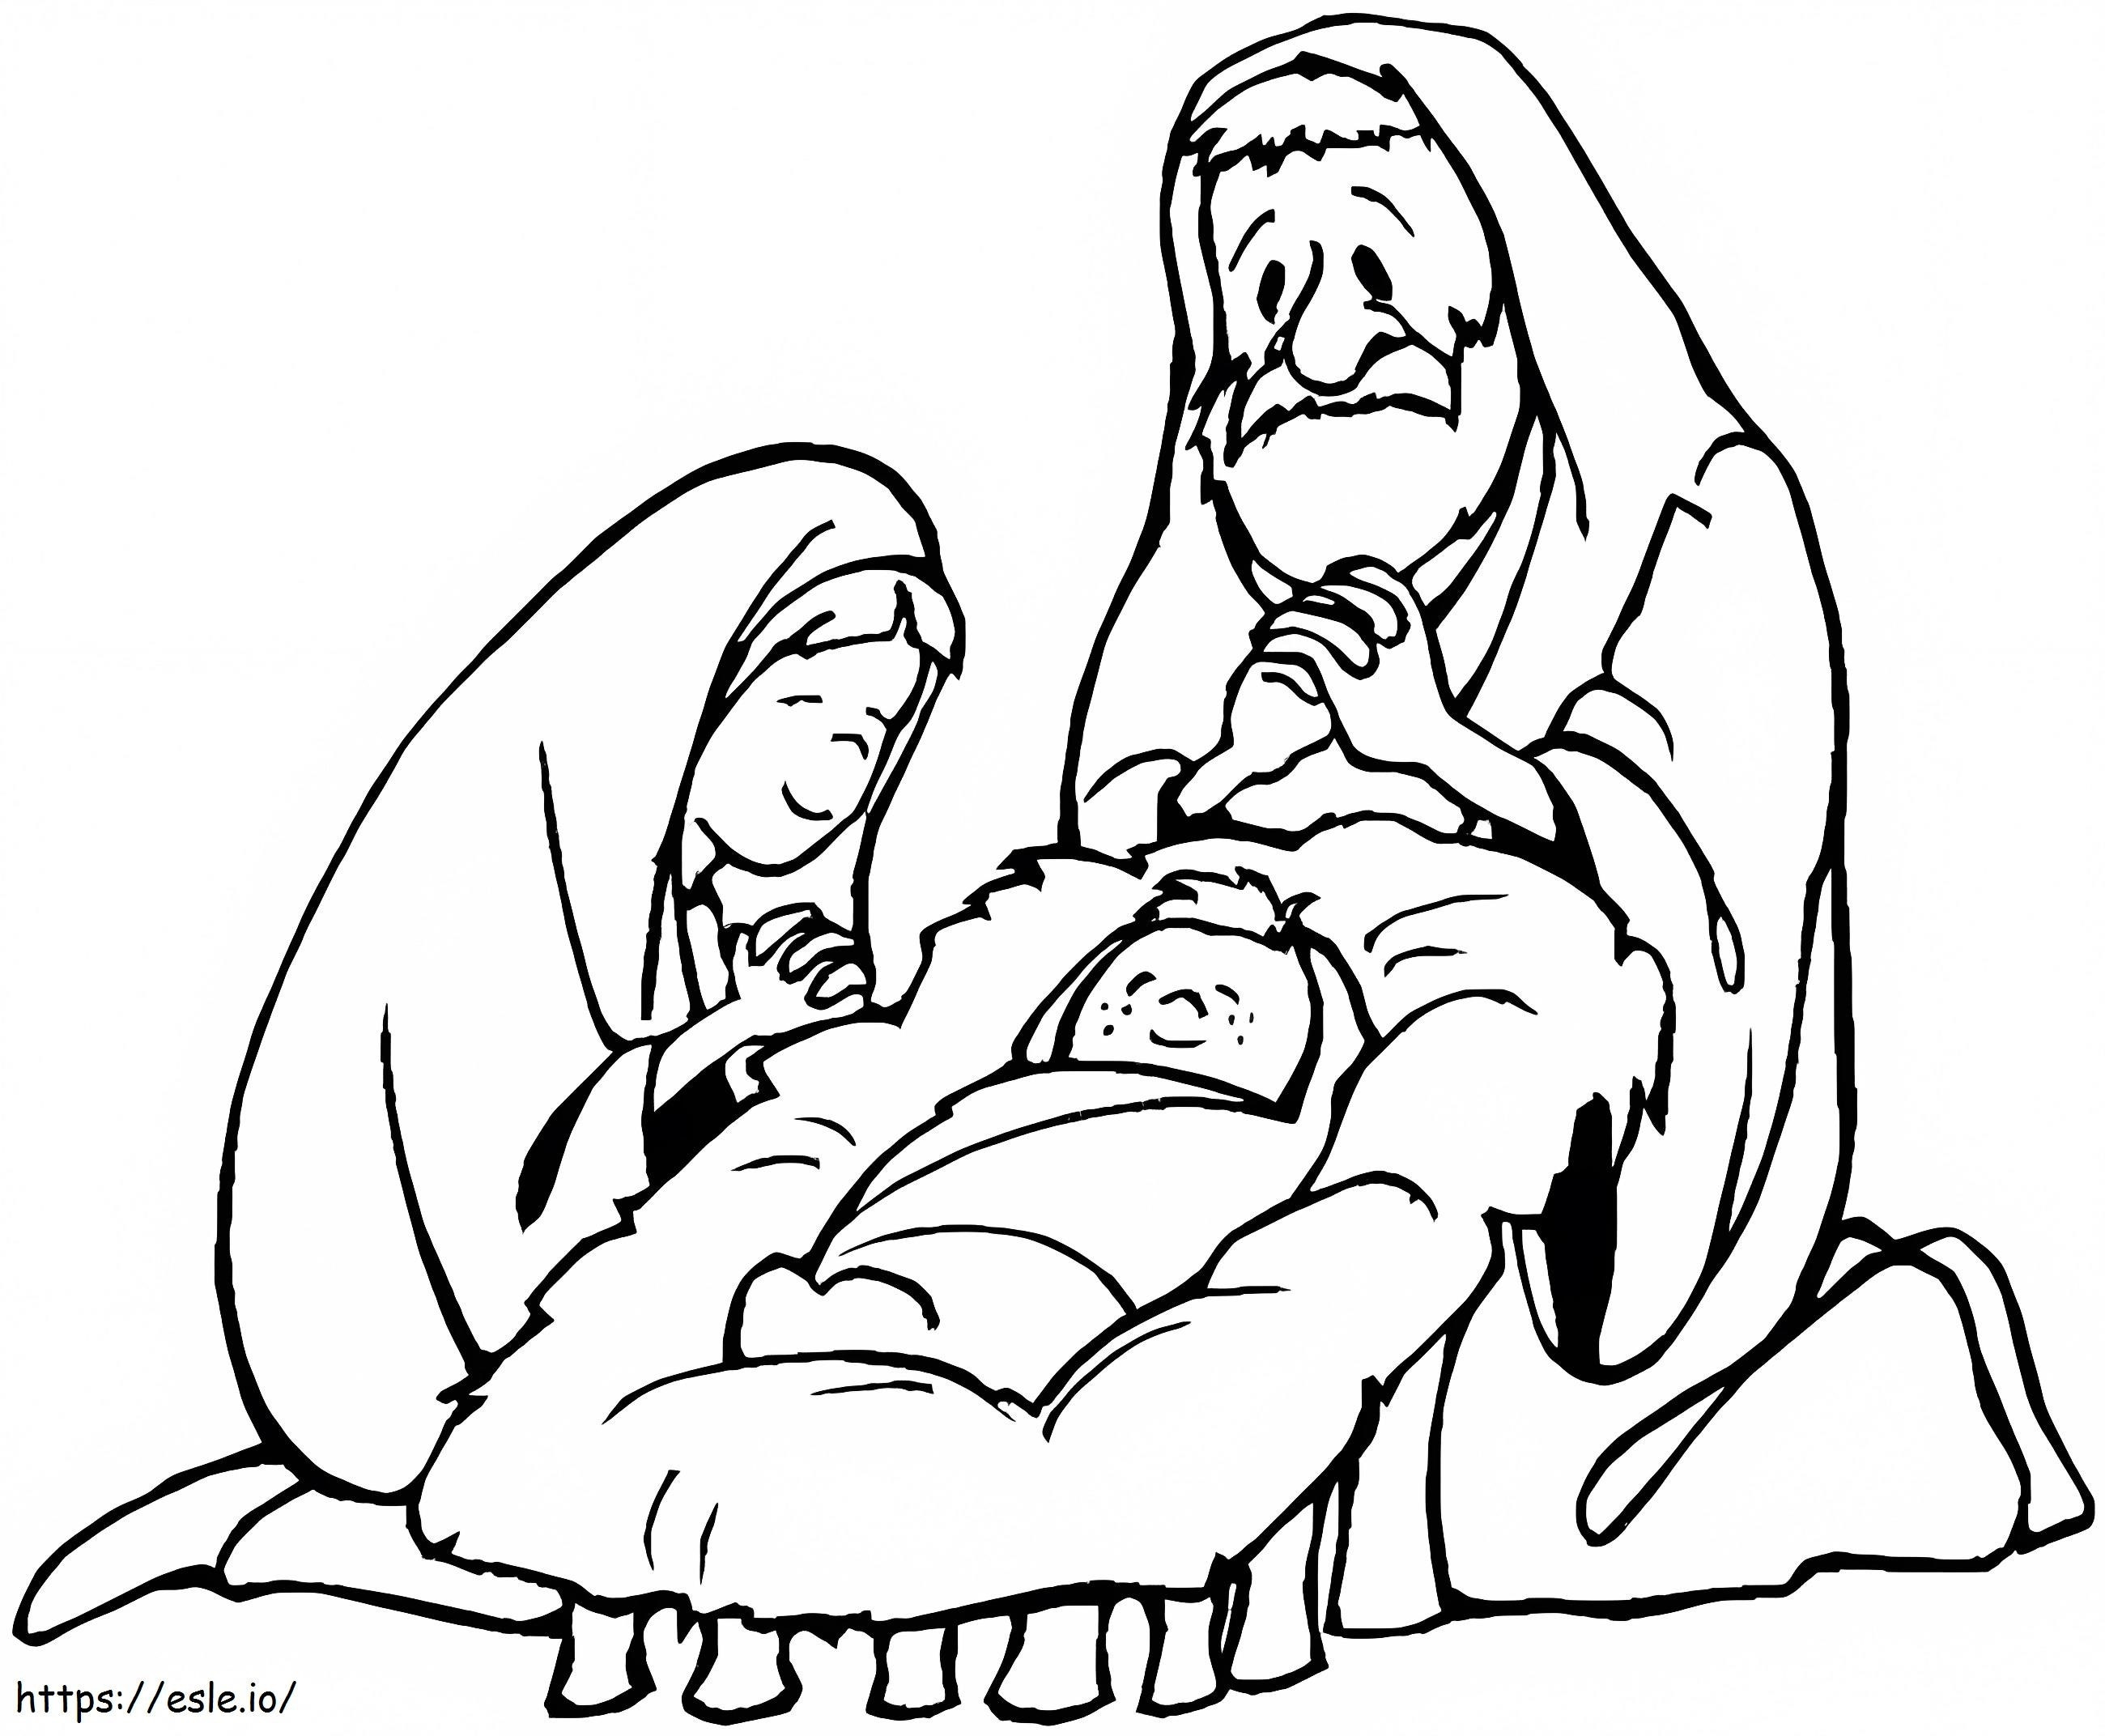 Baby Jesus 2 coloring page